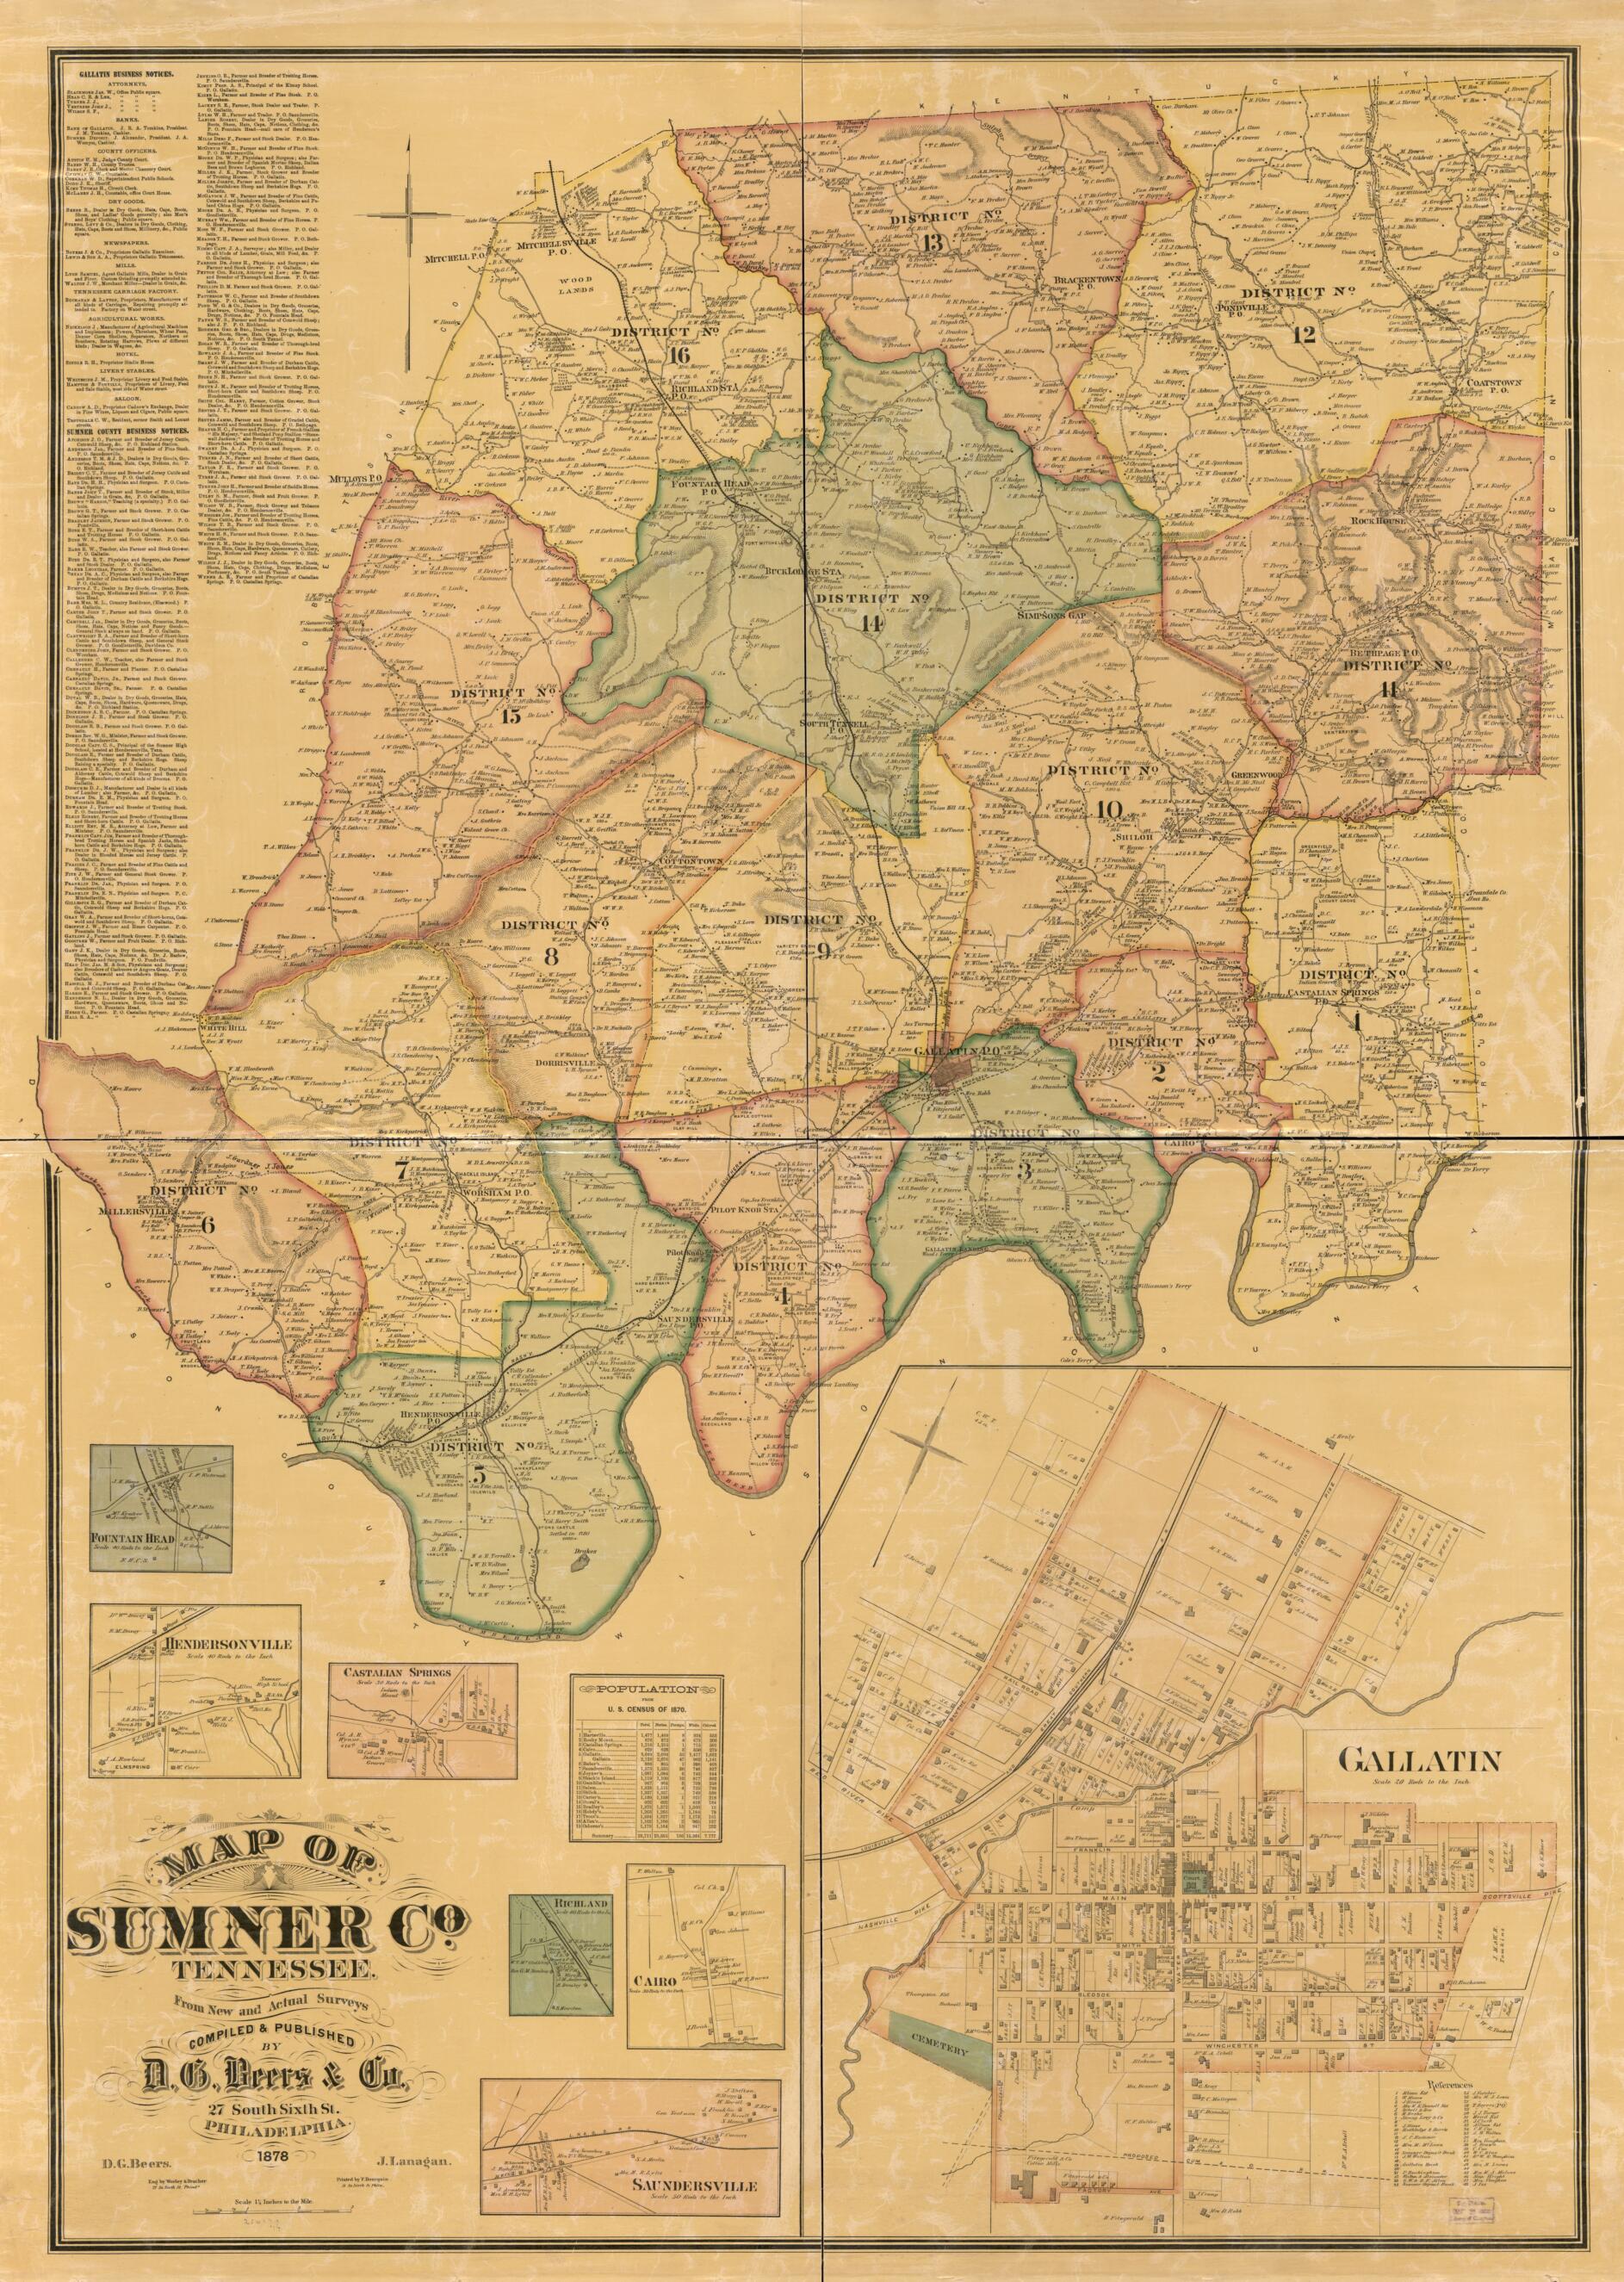 This old map of Map of Sumner Co., Tennessee : from New and Actual Surveys (Map of Sumner County, Tennessee) from 1878 was created by D. G. (Daniel G.) Beers, F. (Frederick) Bourquin,  D.G. Beers &amp; Co, J. Lanagan,  Worley &amp; Bracher in 1878